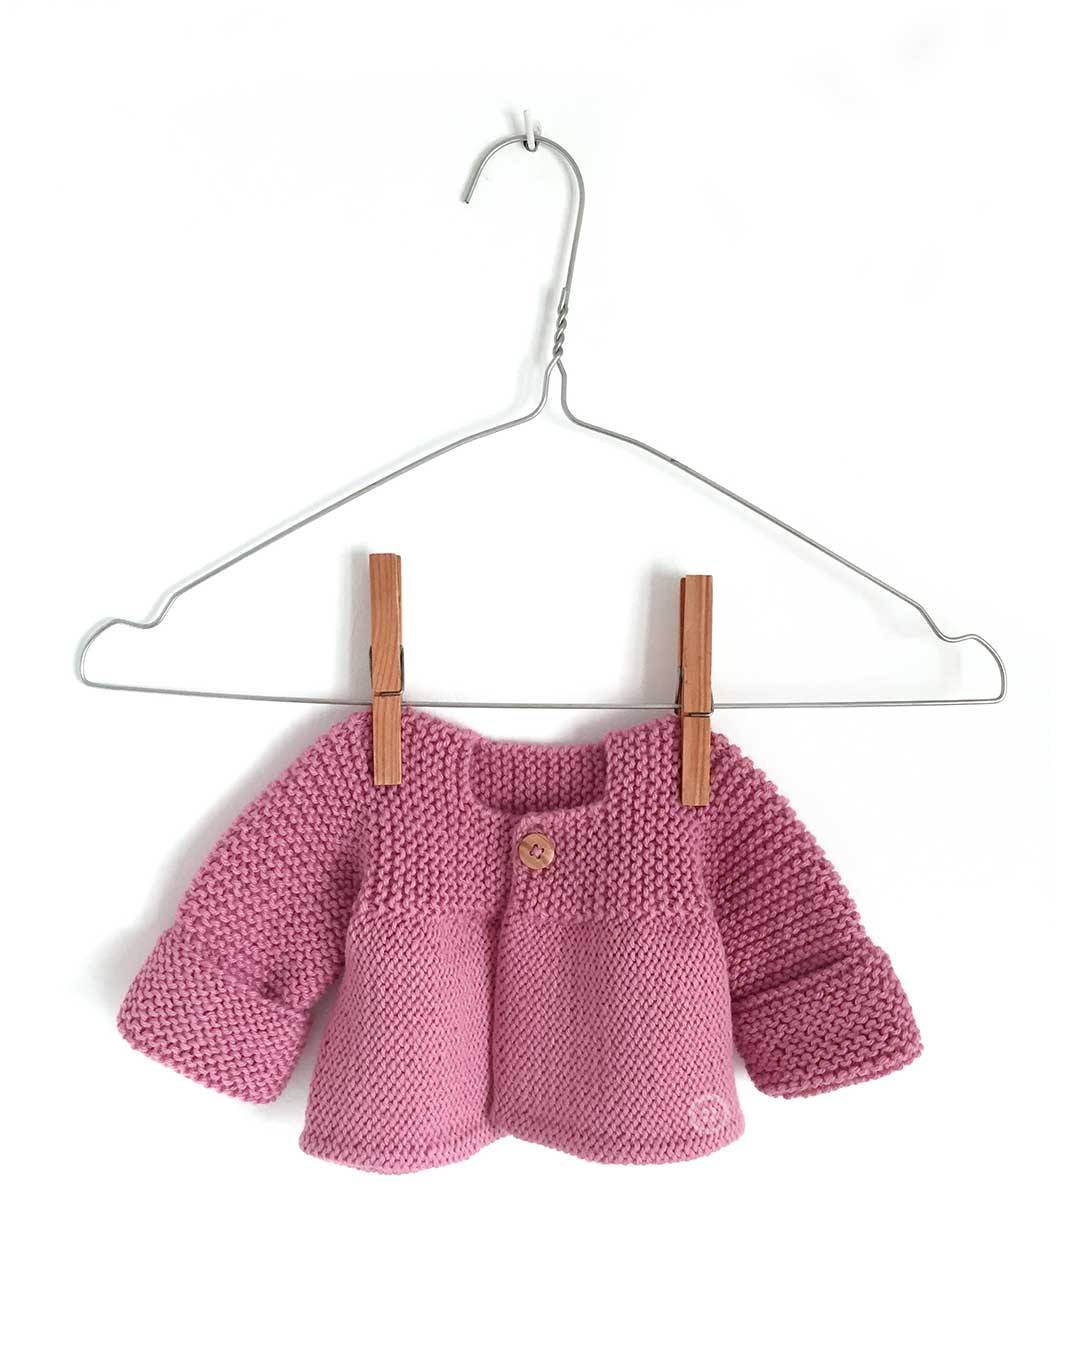 Knitted Baby Cardigan – PINK LADY -Two needle Knitting Pattern & tutorial